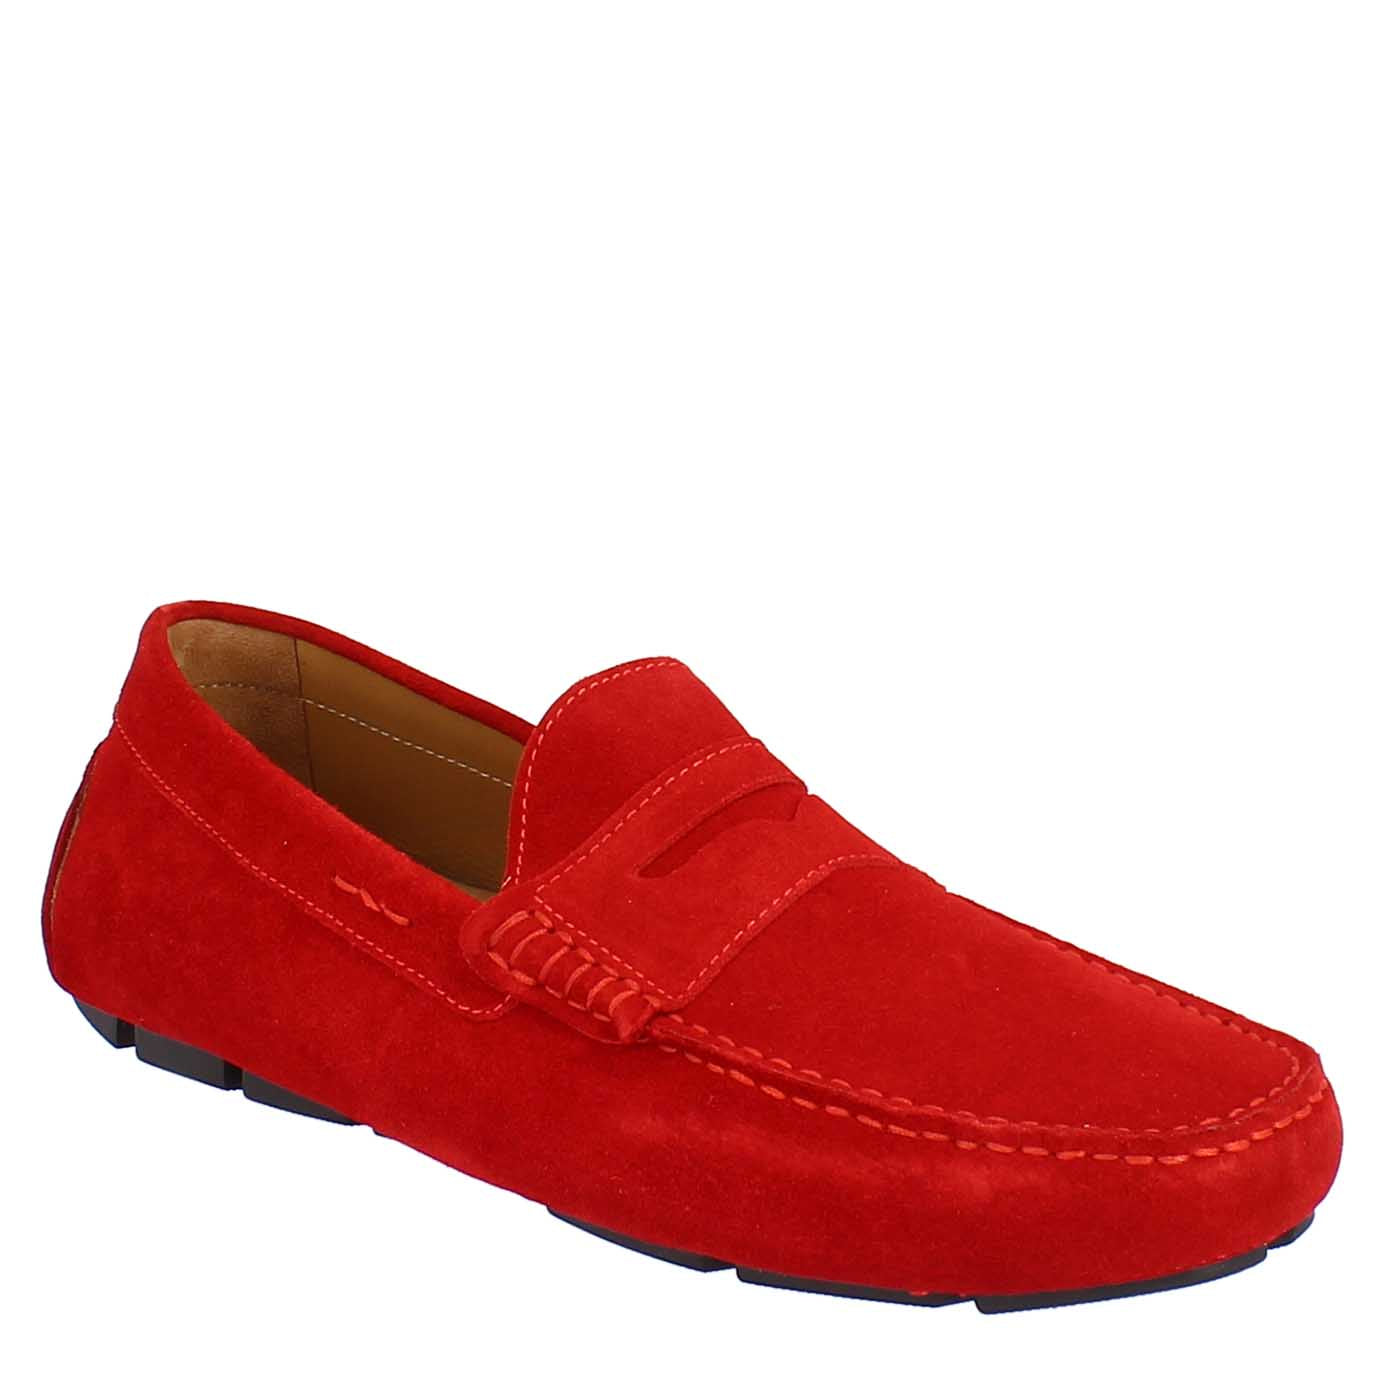 men's loafers LEATHER red suede.